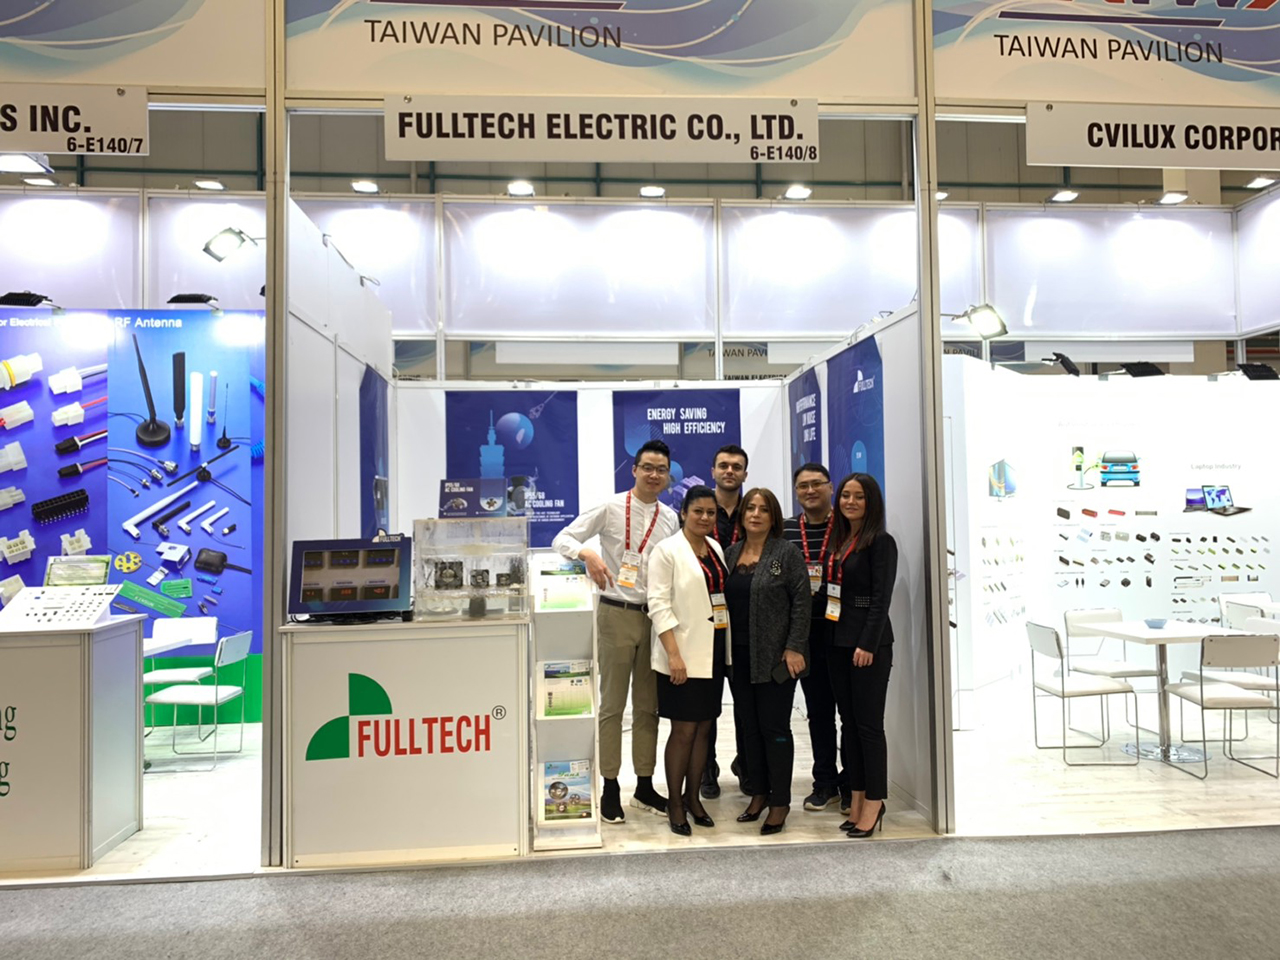 2019 WIN EURASIA is the first exhibition Fulltech Electric Co., Ltd. attended in Turkey